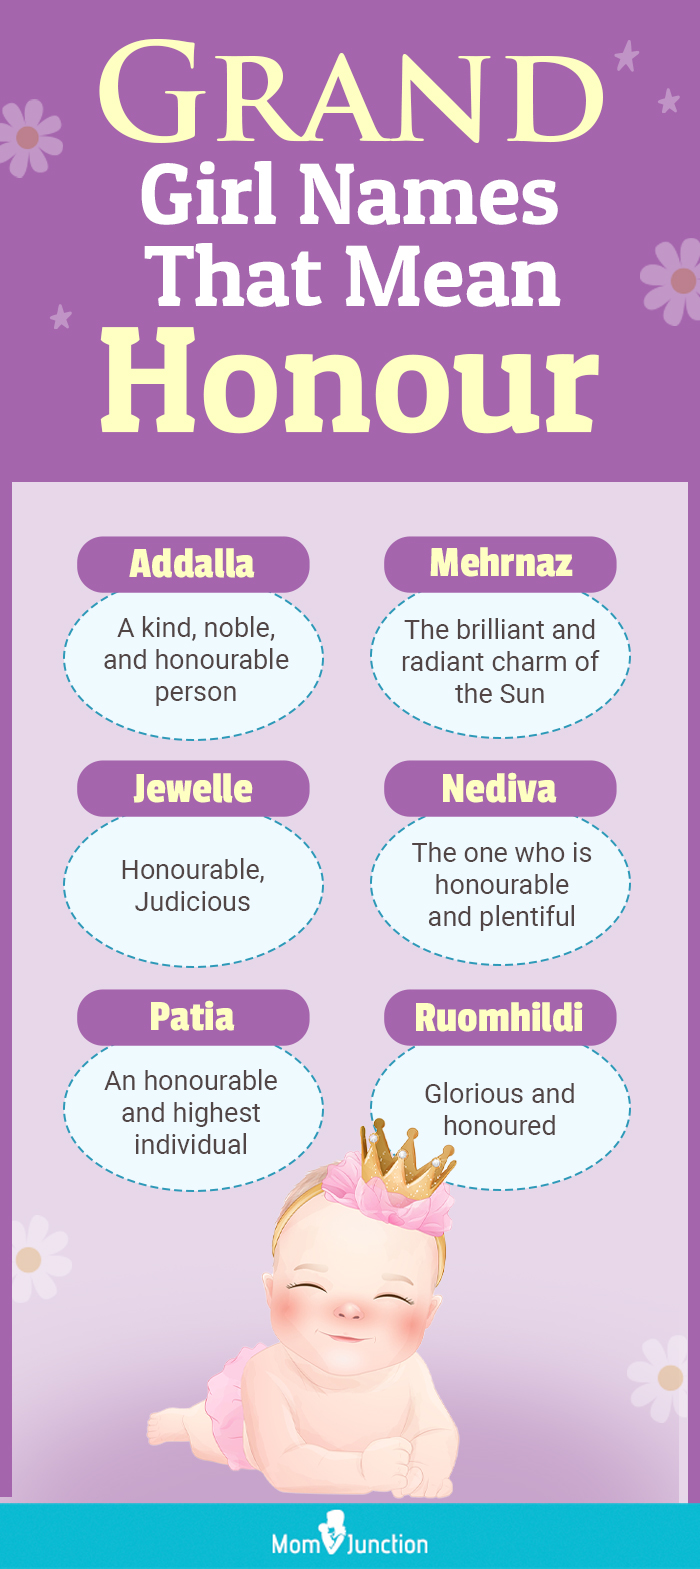 grand girl names that mean honour (infographic)